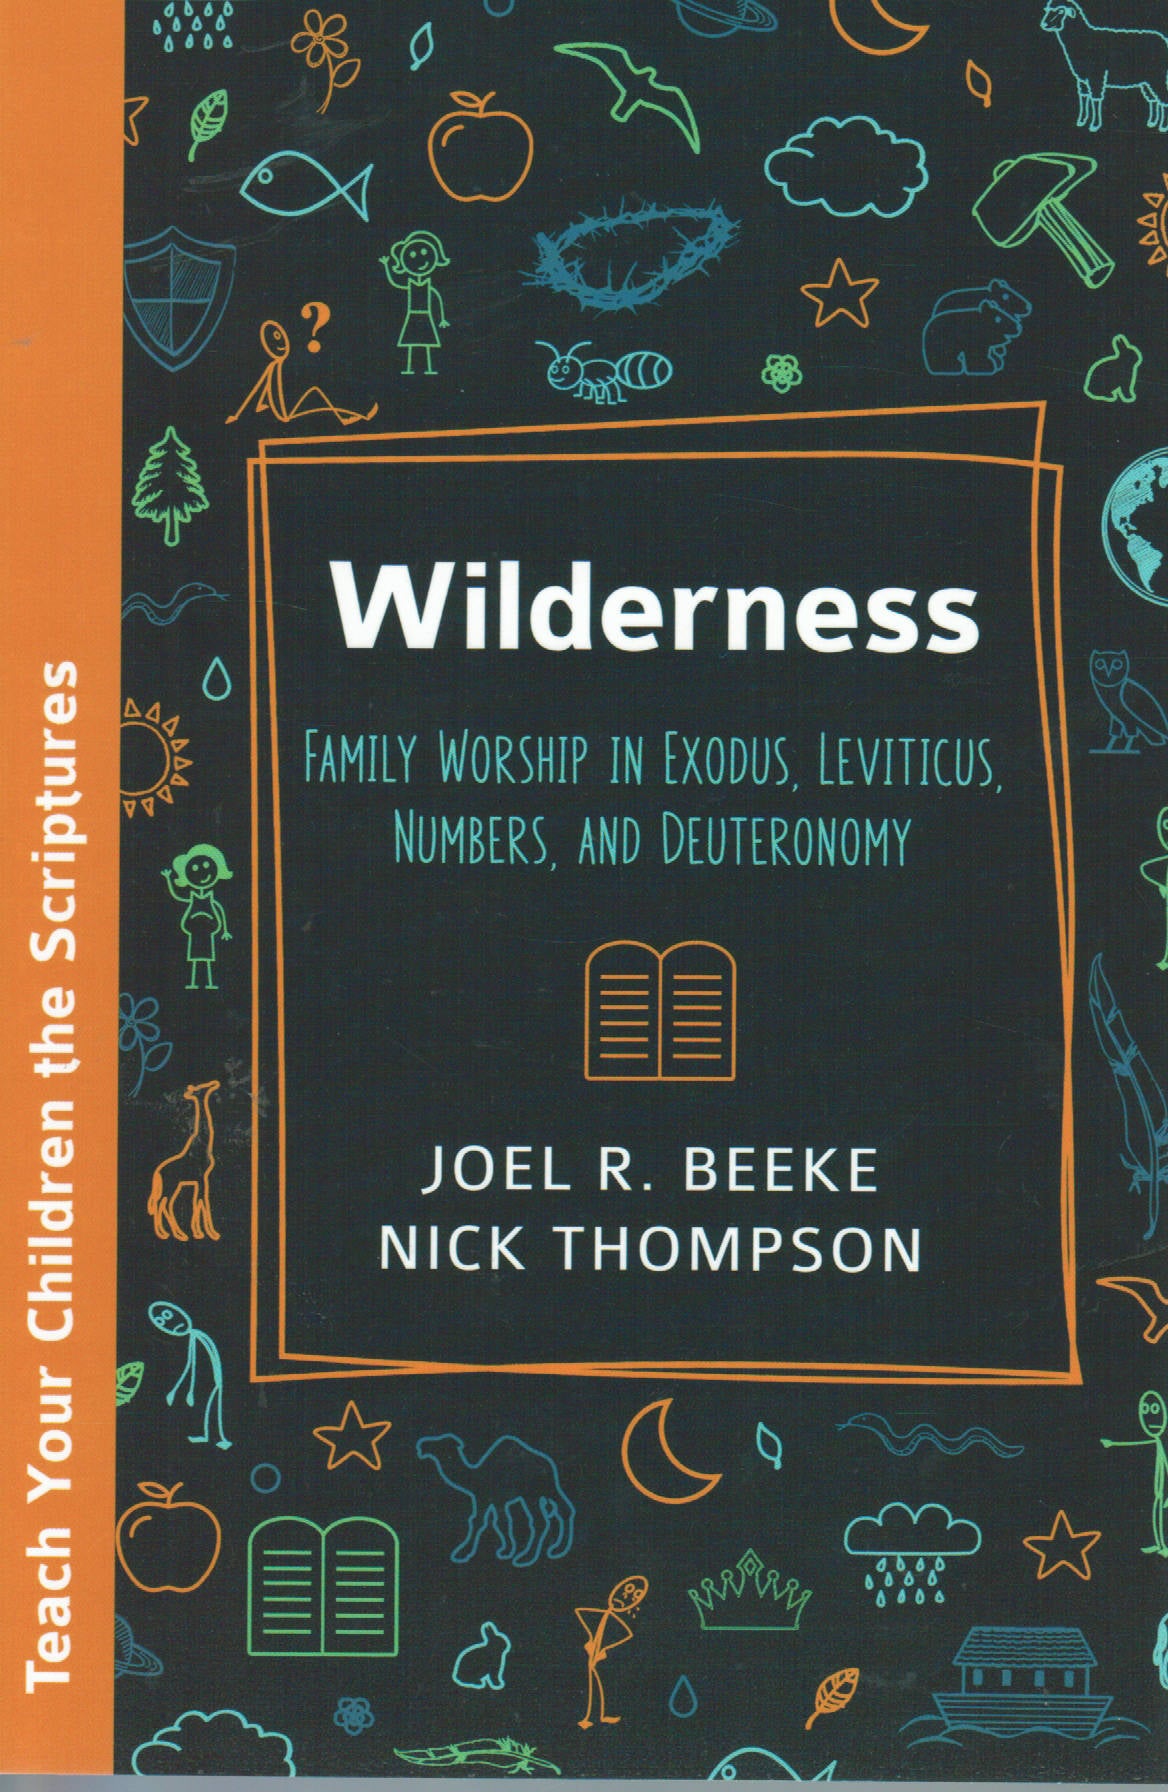 Teach Your Children the Scriptures - Wilderness: Family Worship in Exodus, Leviticus, Numbers, and Deuteronomy